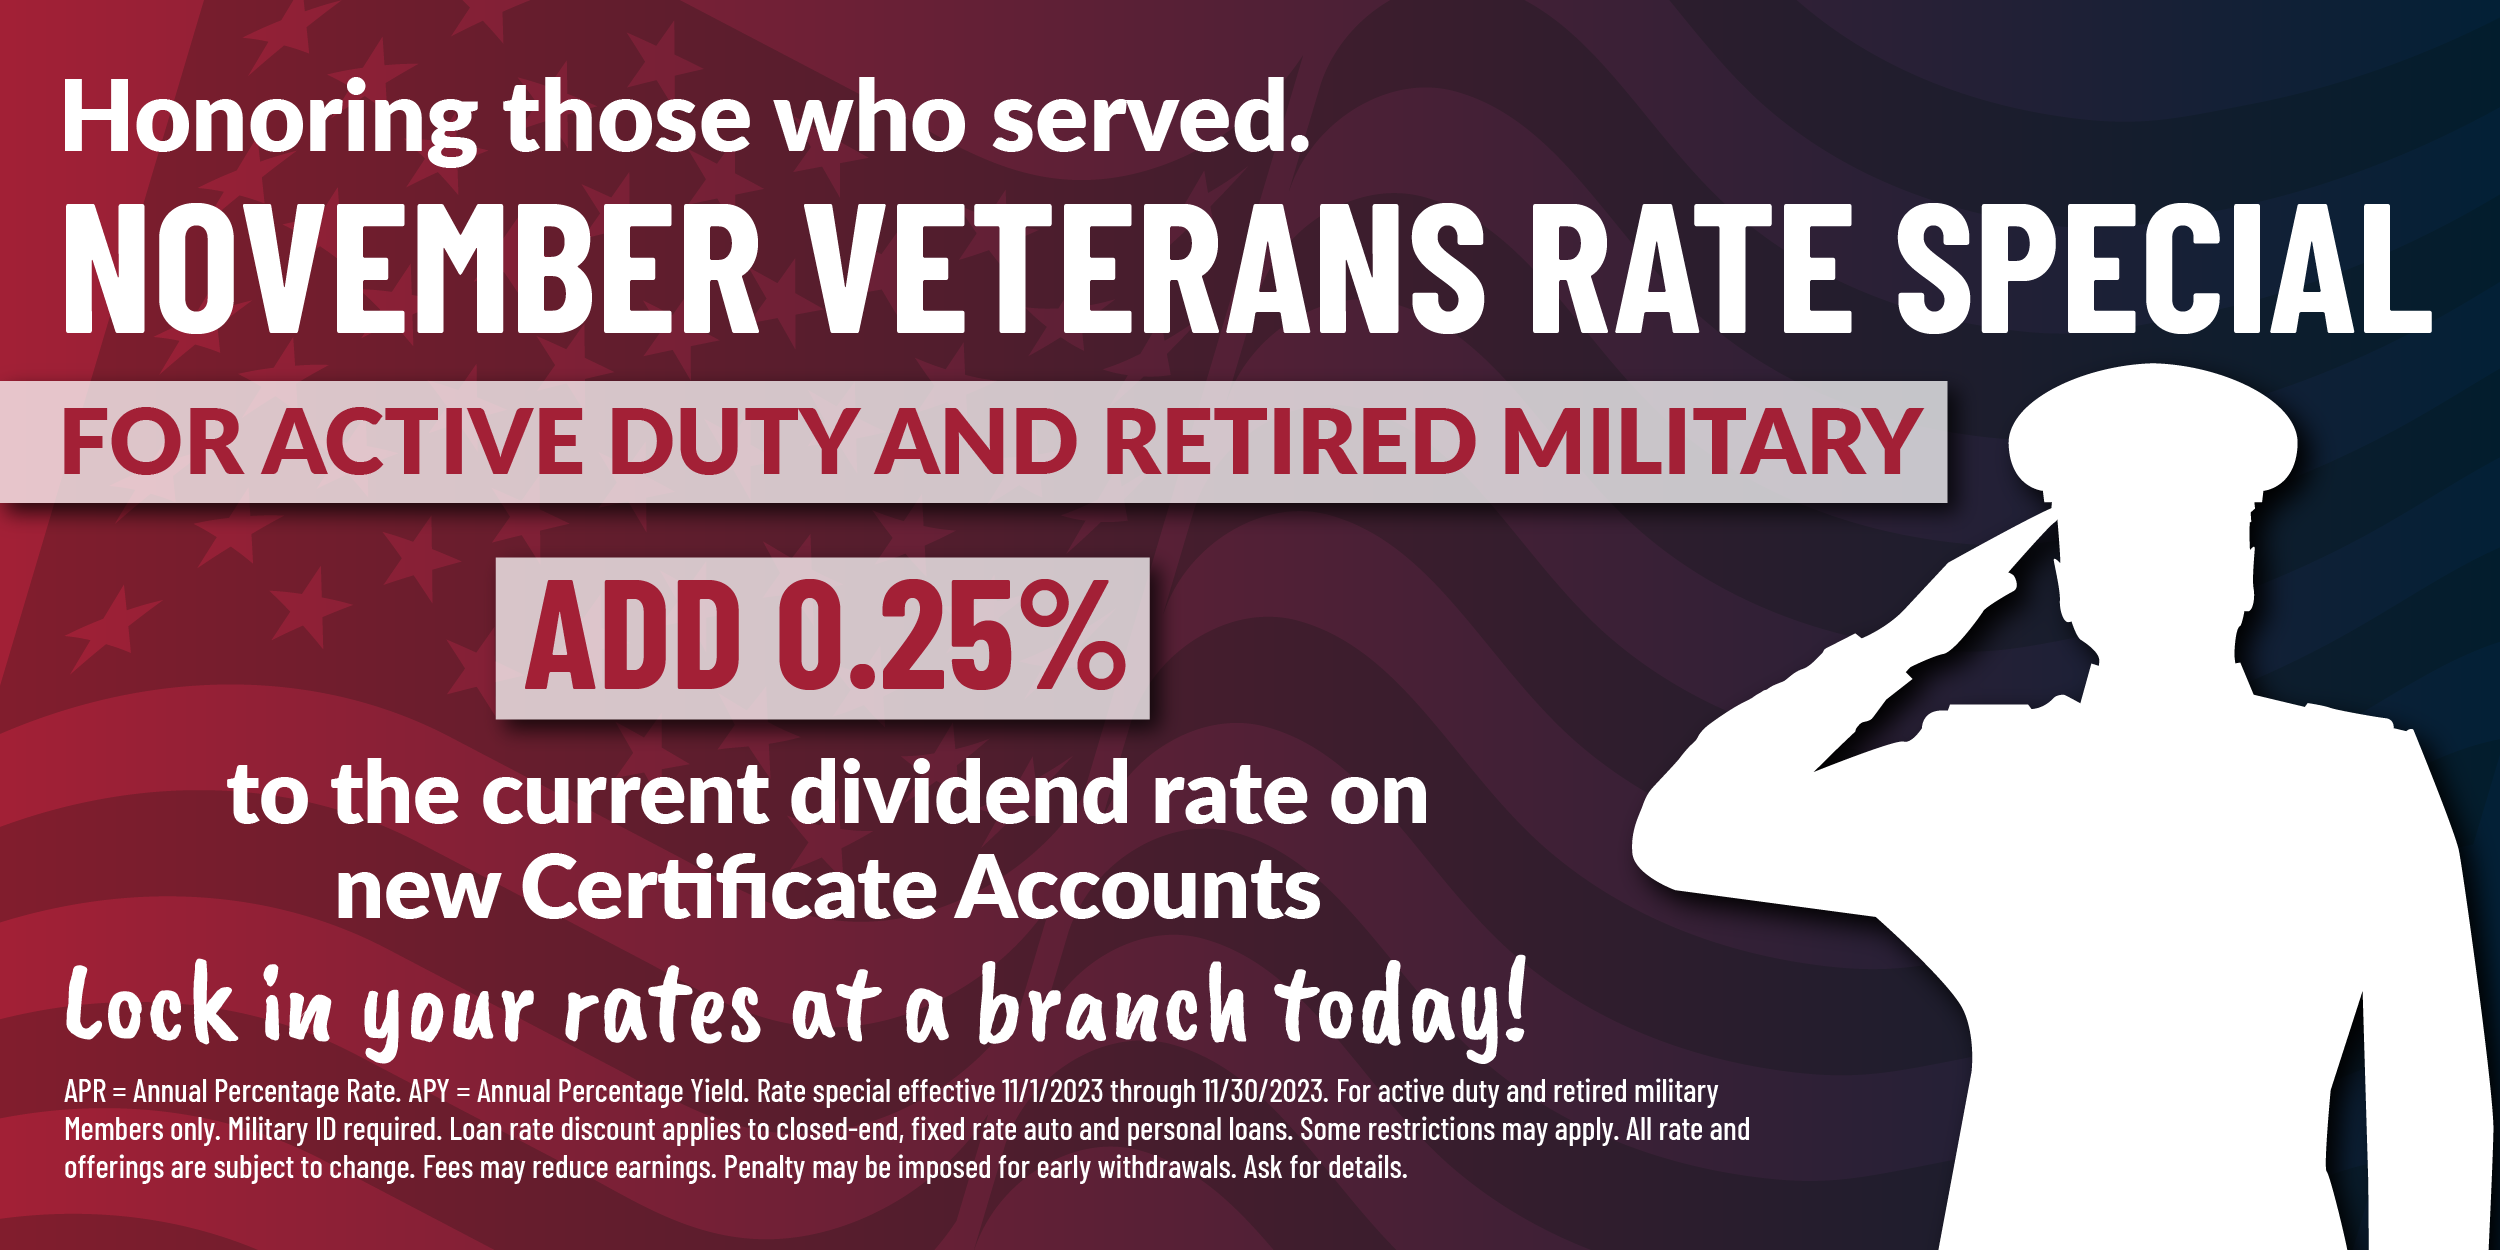 Veterans Rate Special Share Accounts